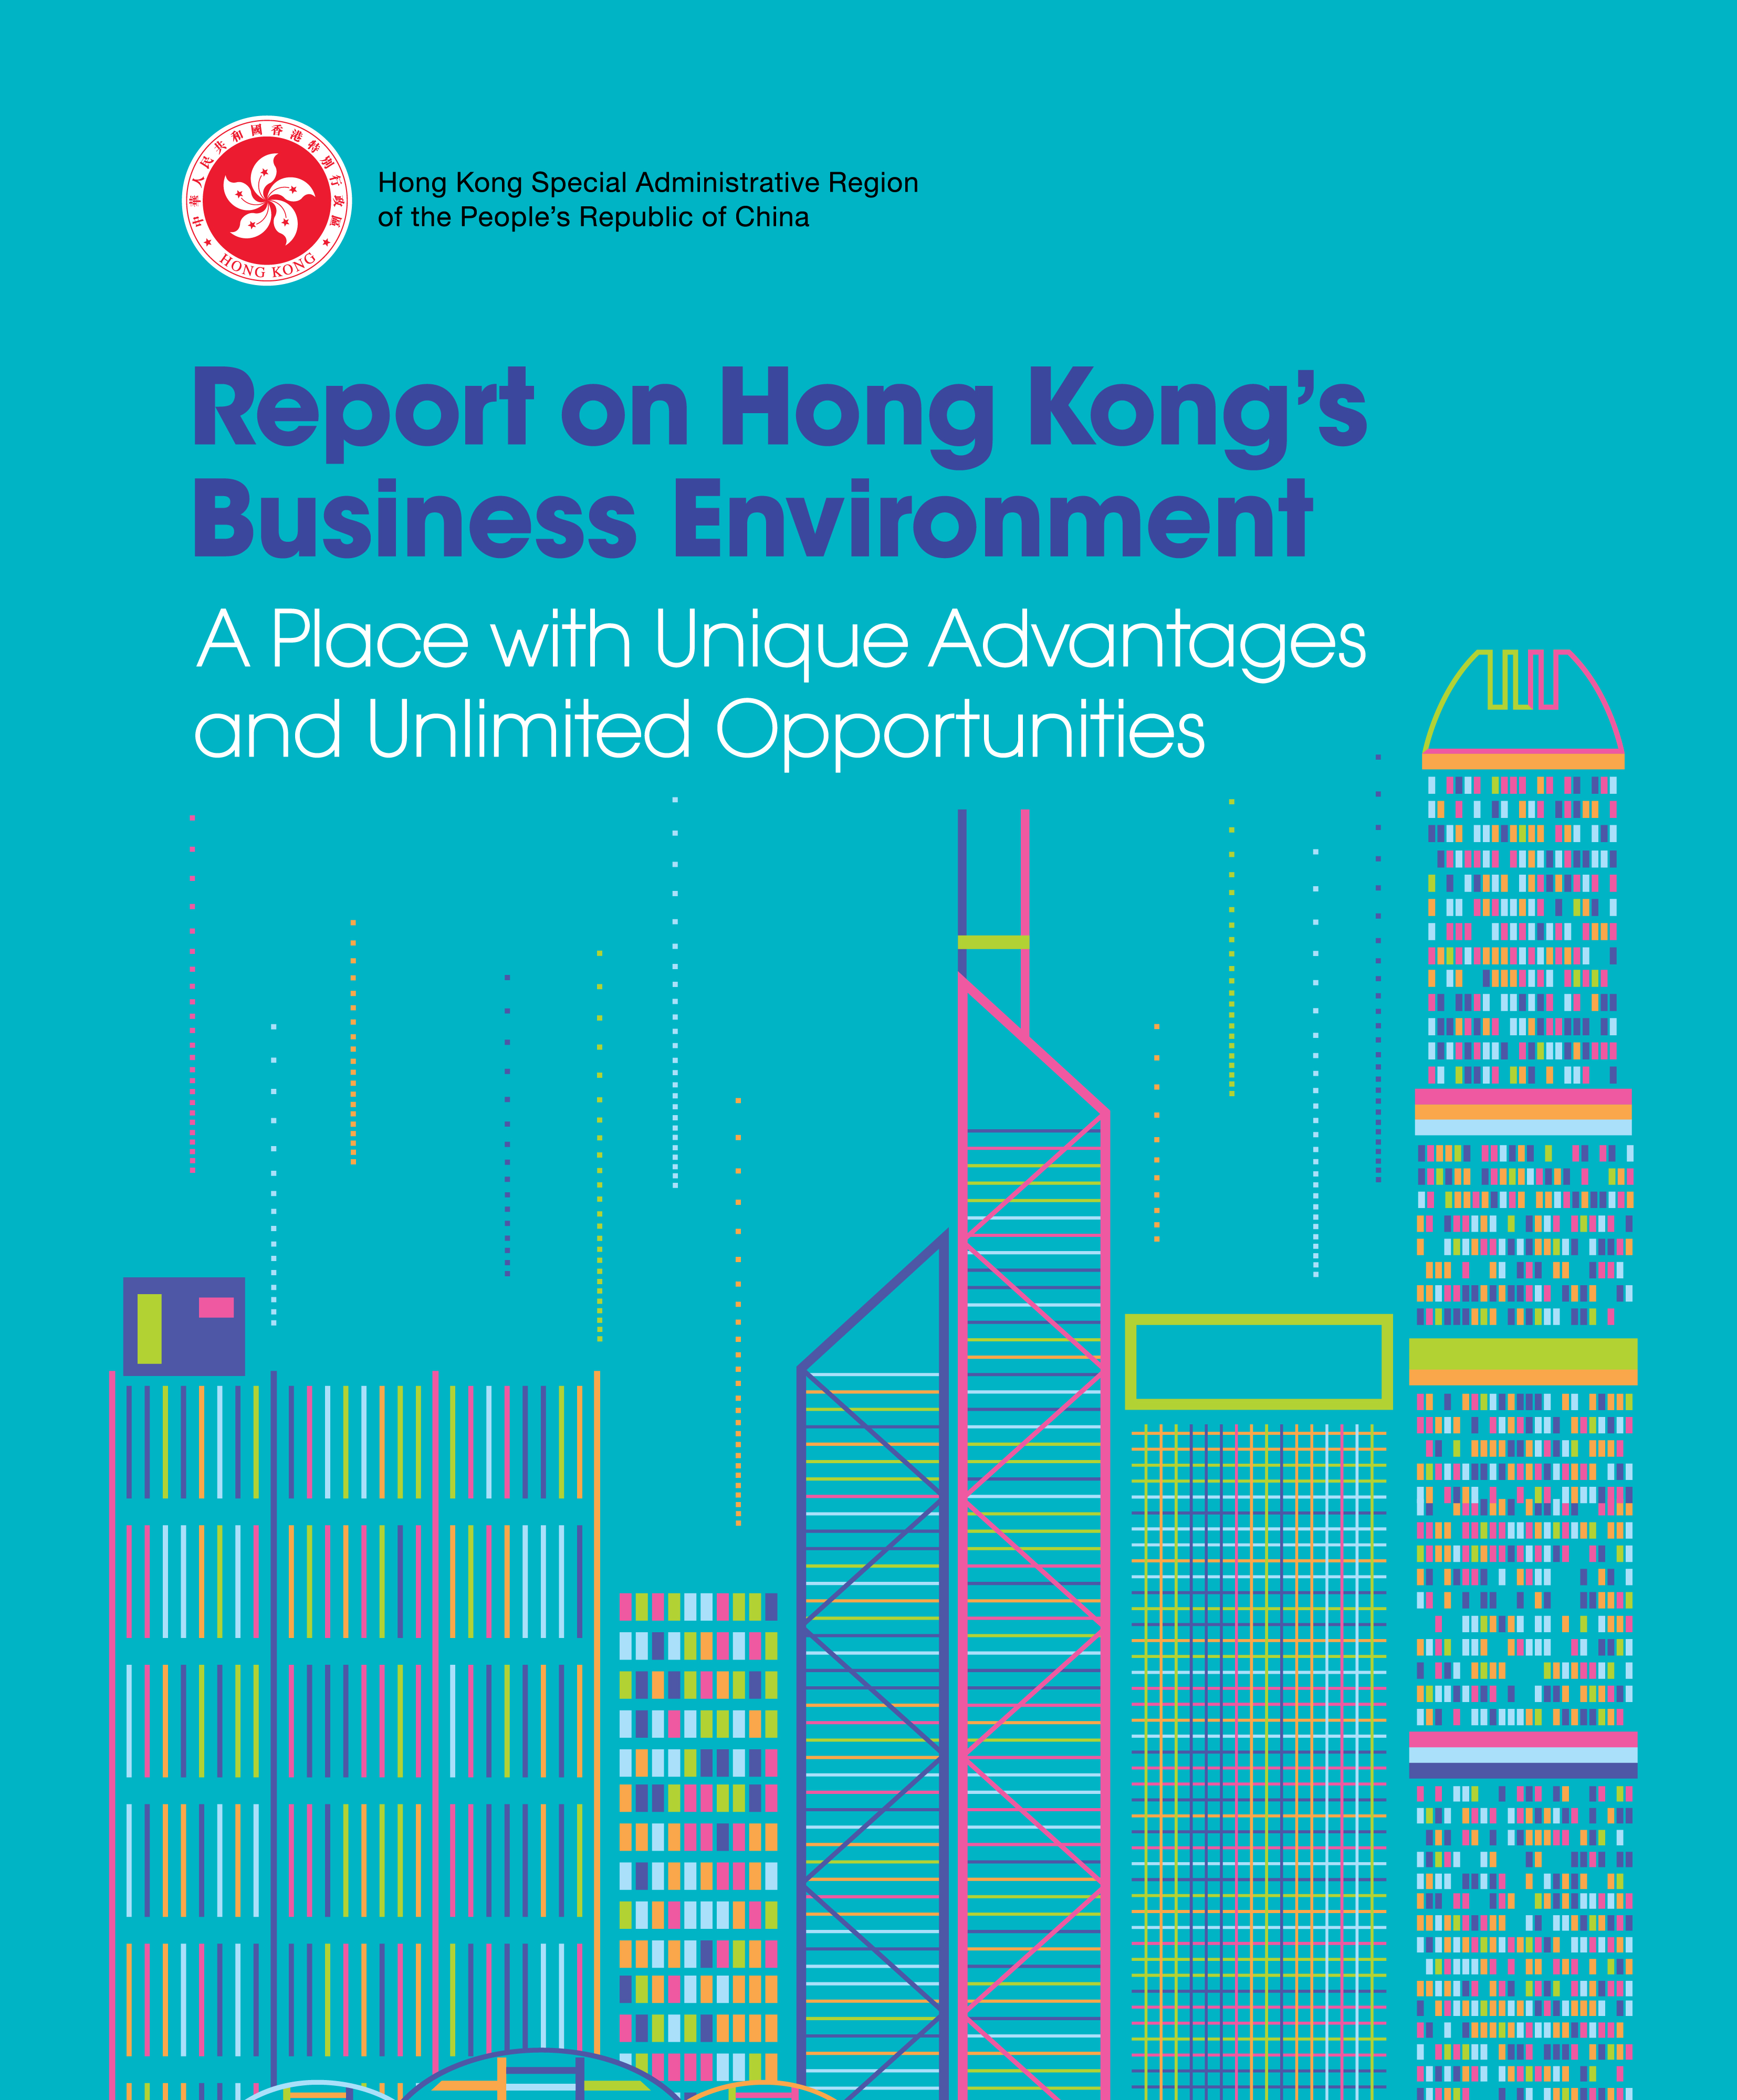 HKSAR Government publishes "Report on Hong Kong's Business Environment: A Place with Unique Advantages and Unlimited Opportunities"